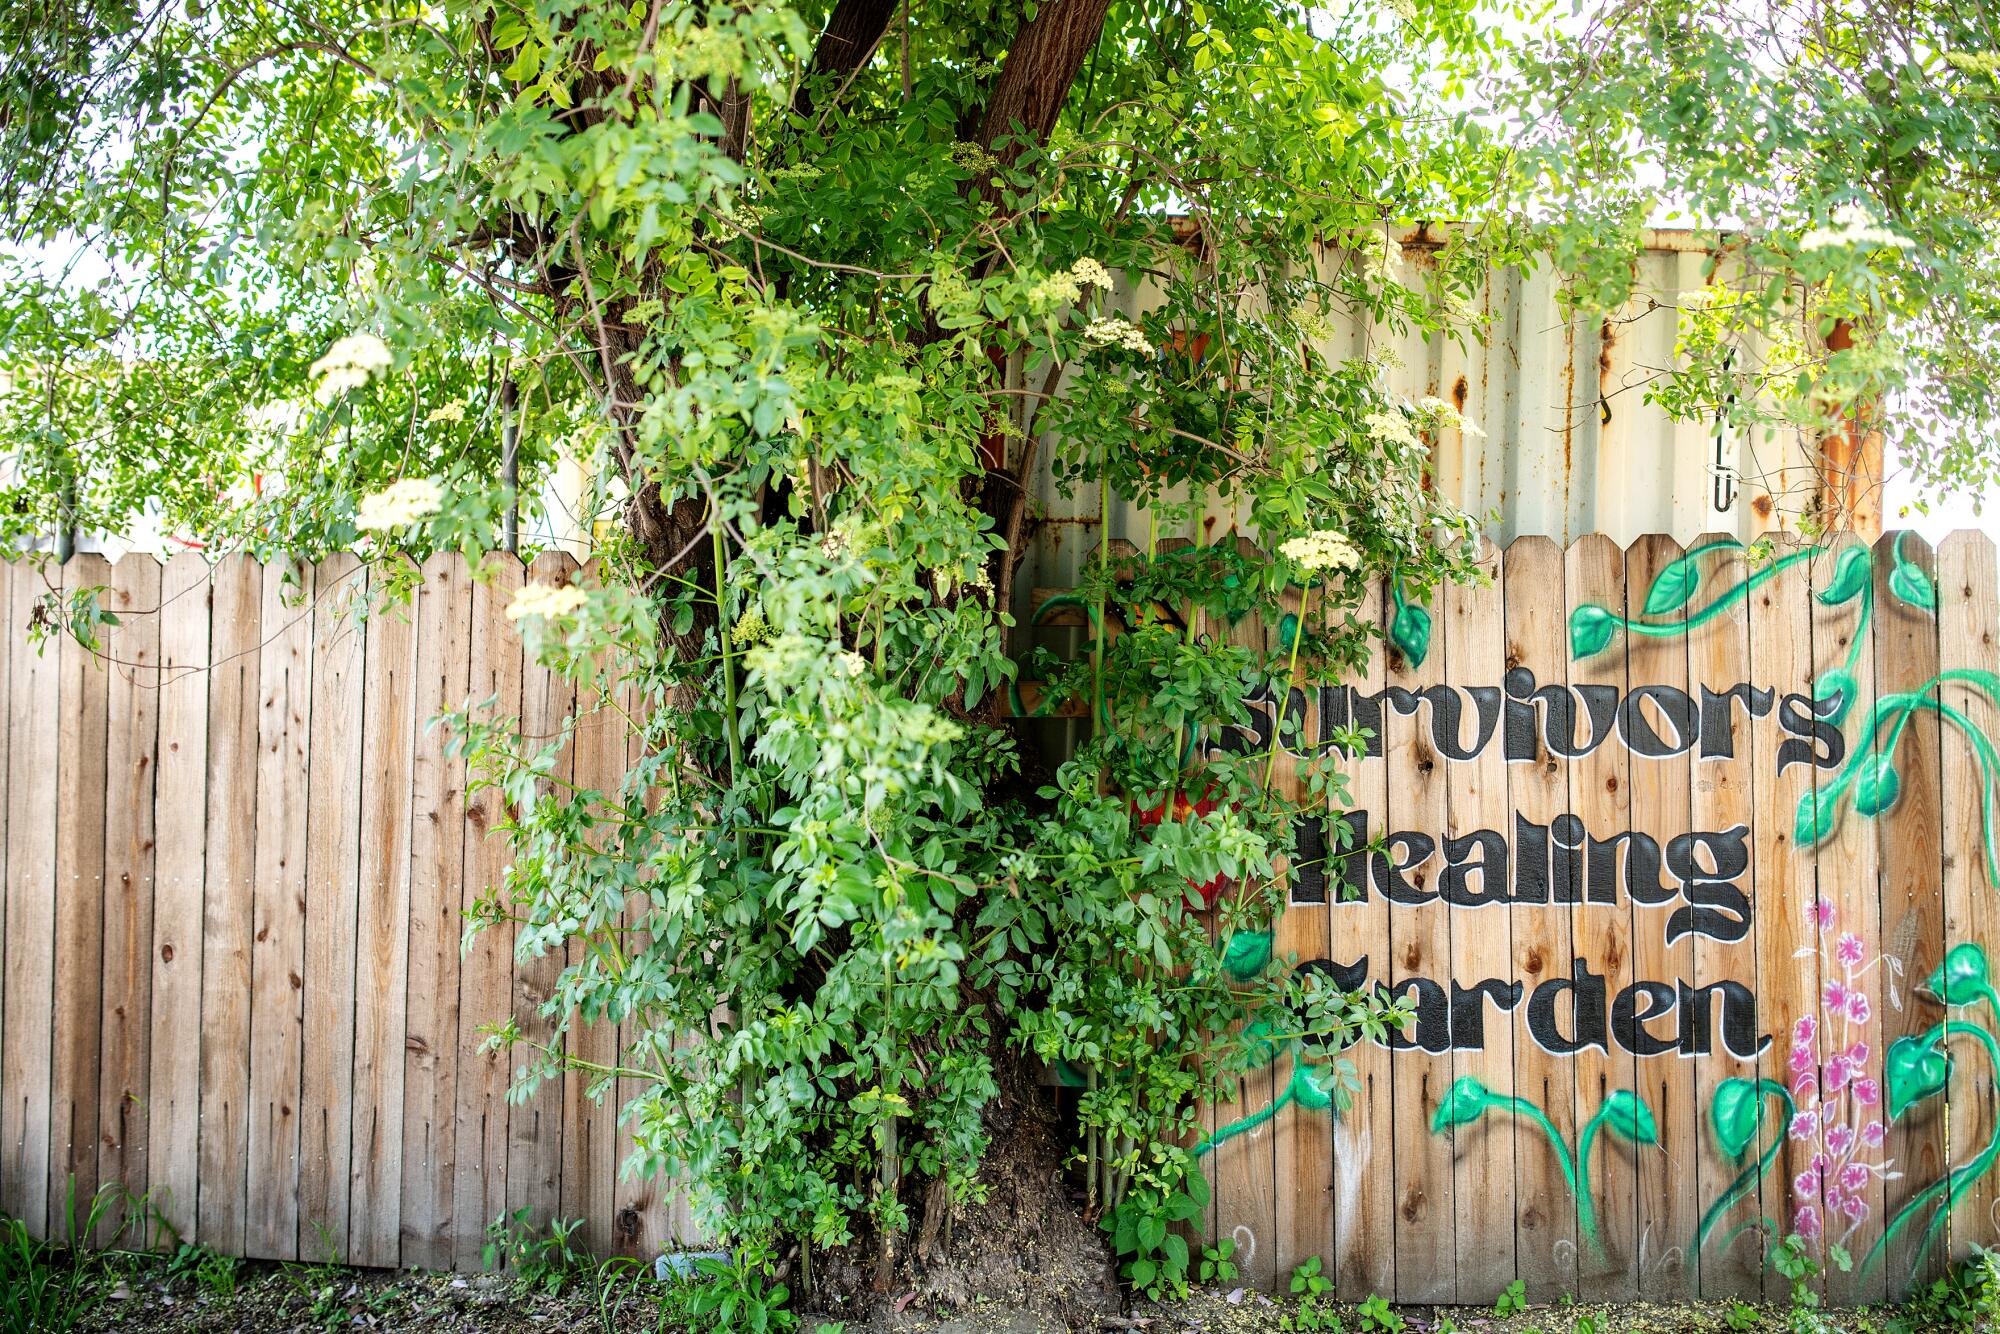 A tree with green leaves grows against a fence decorated with sprout illustrations and the words "Survivors Healing Garden."